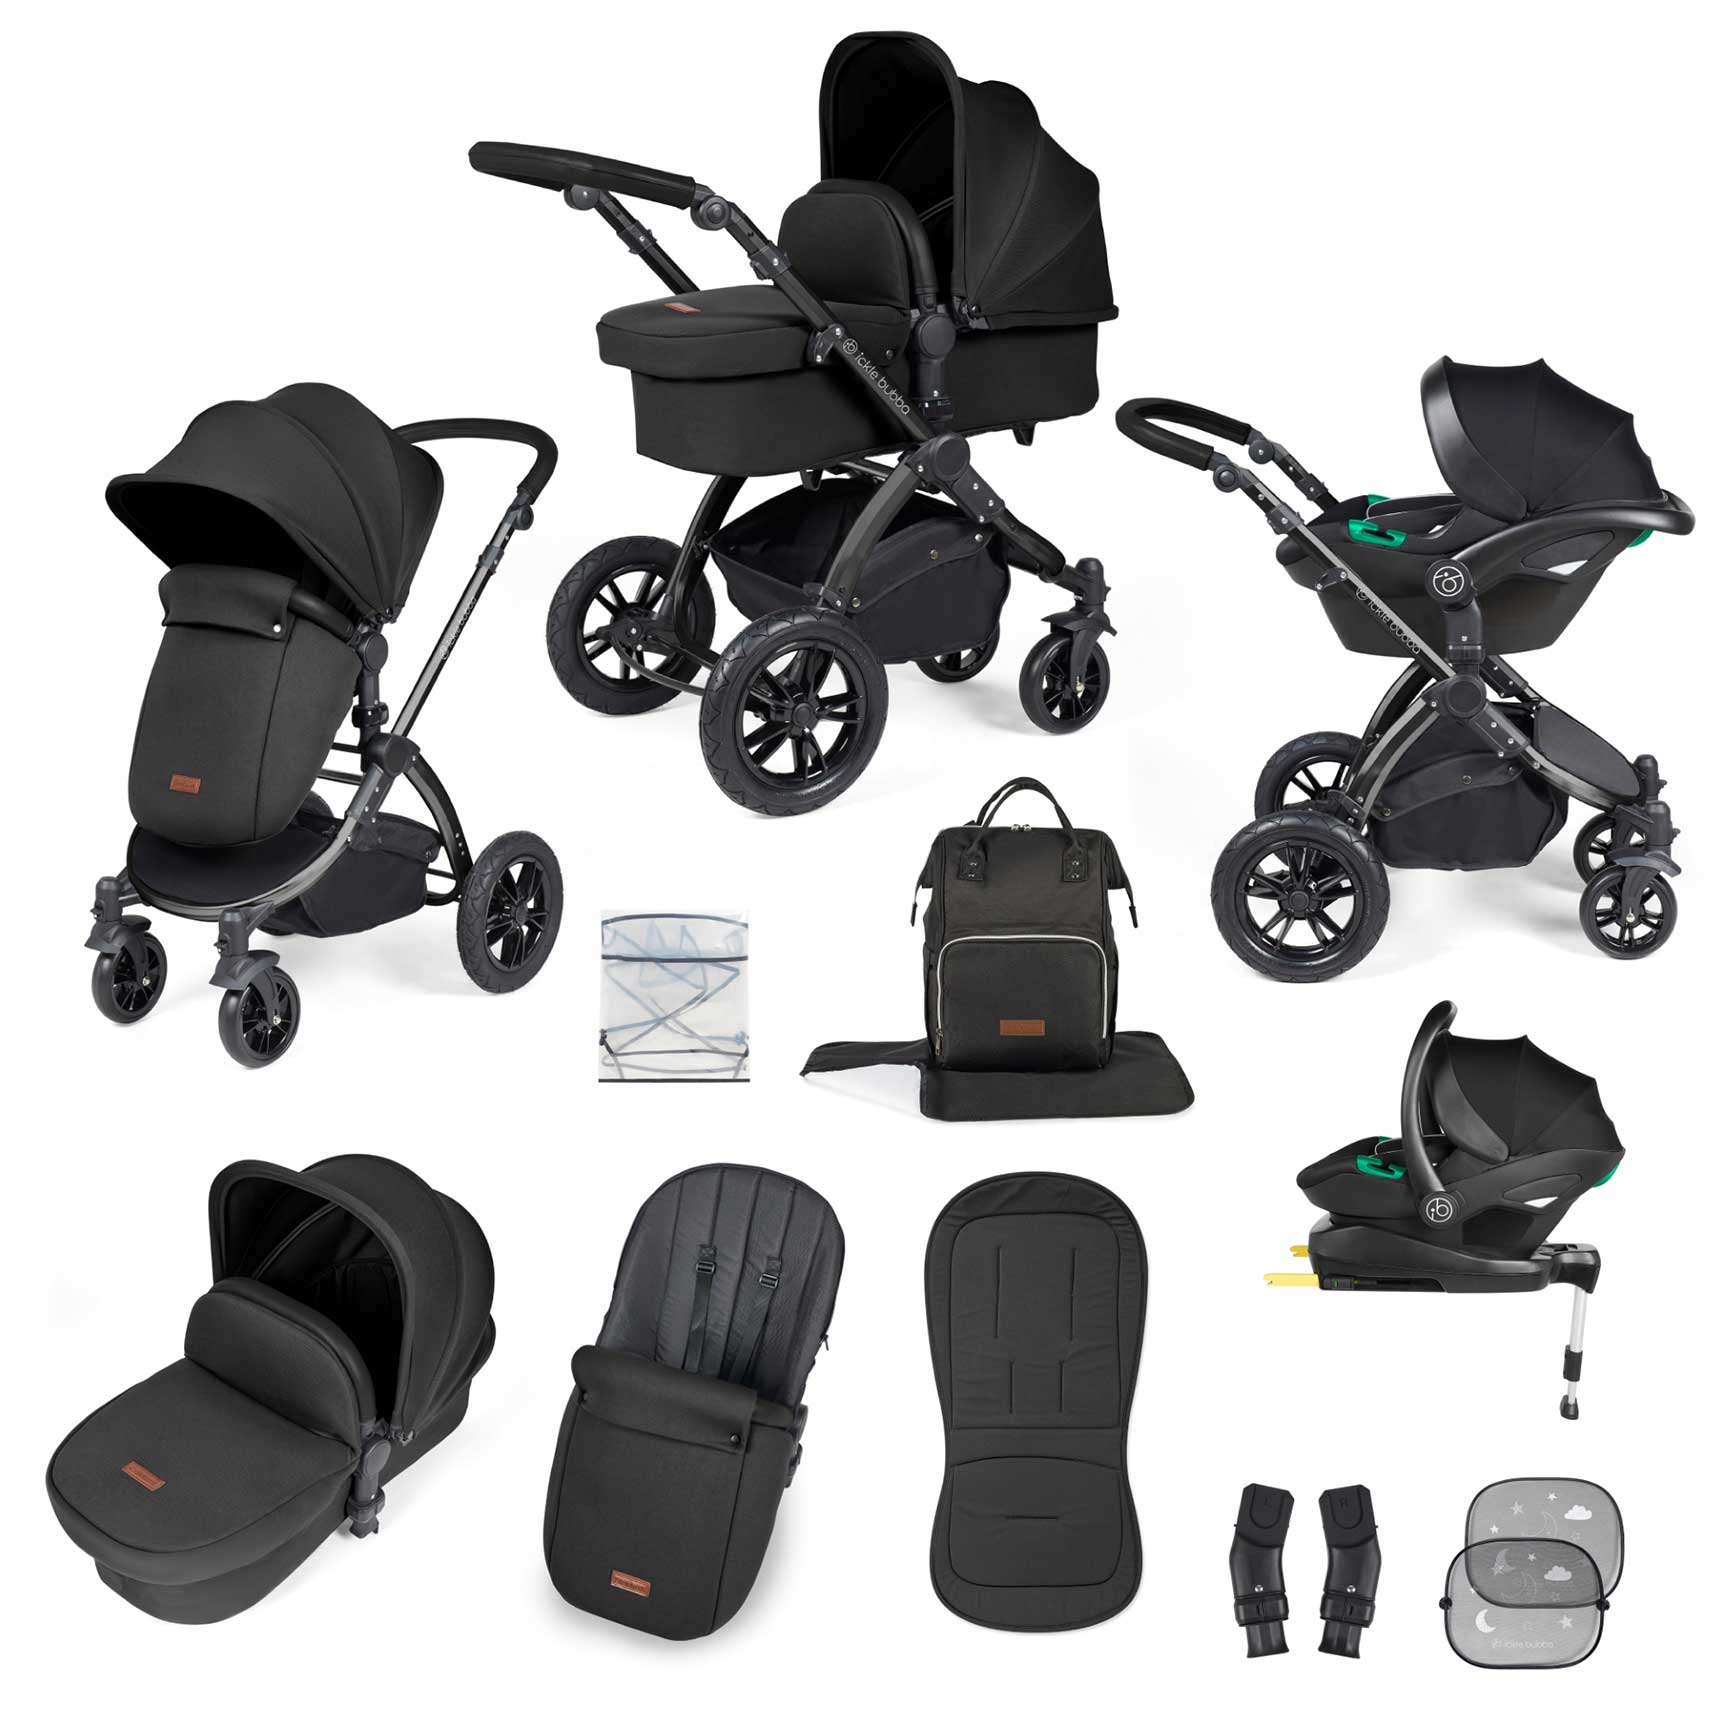 Ickle Bubba travel systems Ickle Bubba Stomp Luxe All-in-One Travel System with Isofix Base - Black/Midnight/Black 10-011-300-202